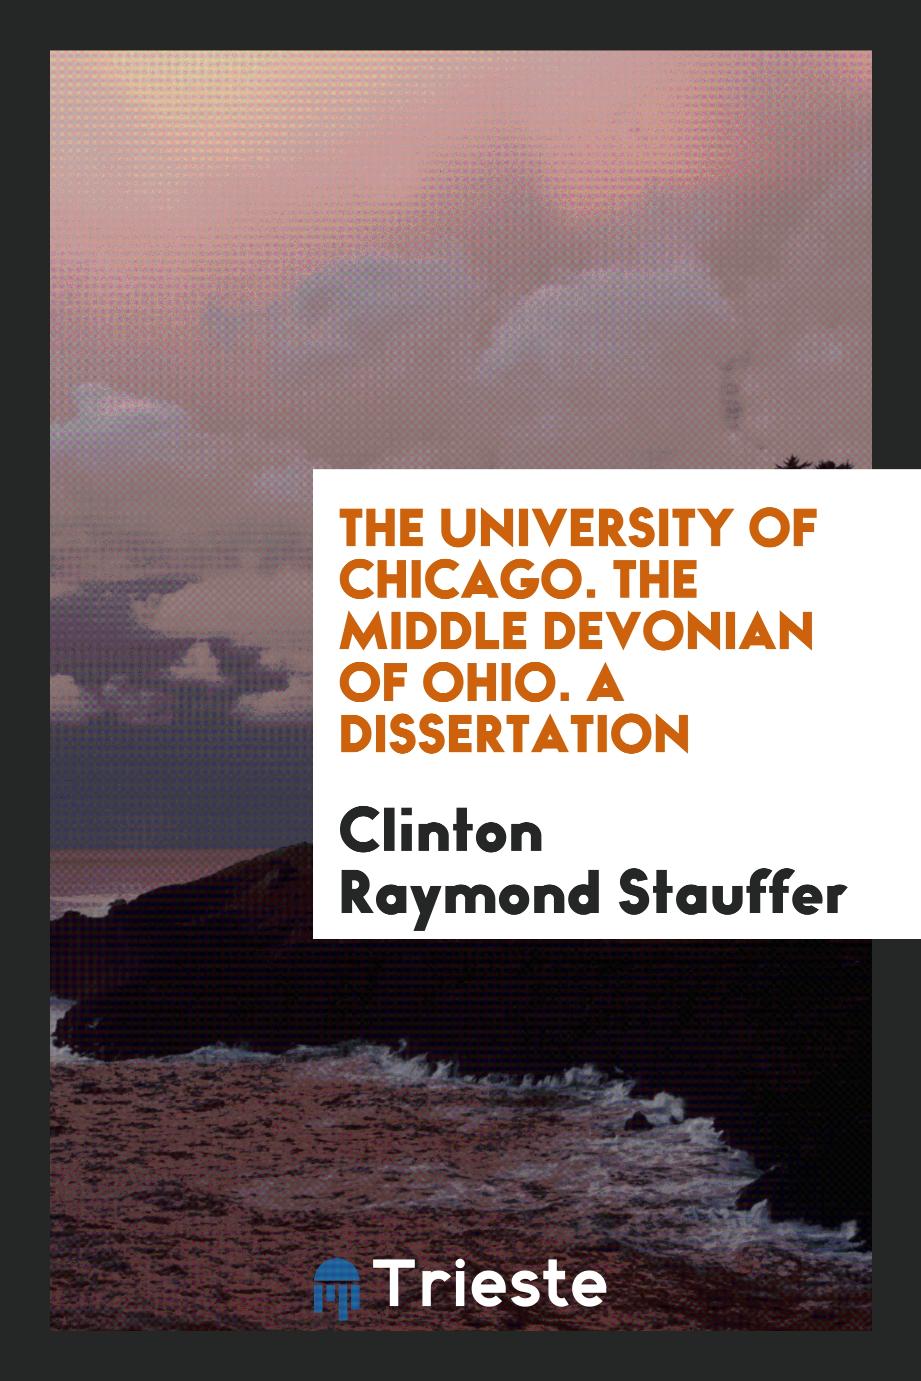 The University of Chicago. The Middle Devonian of Ohio. A Dissertation